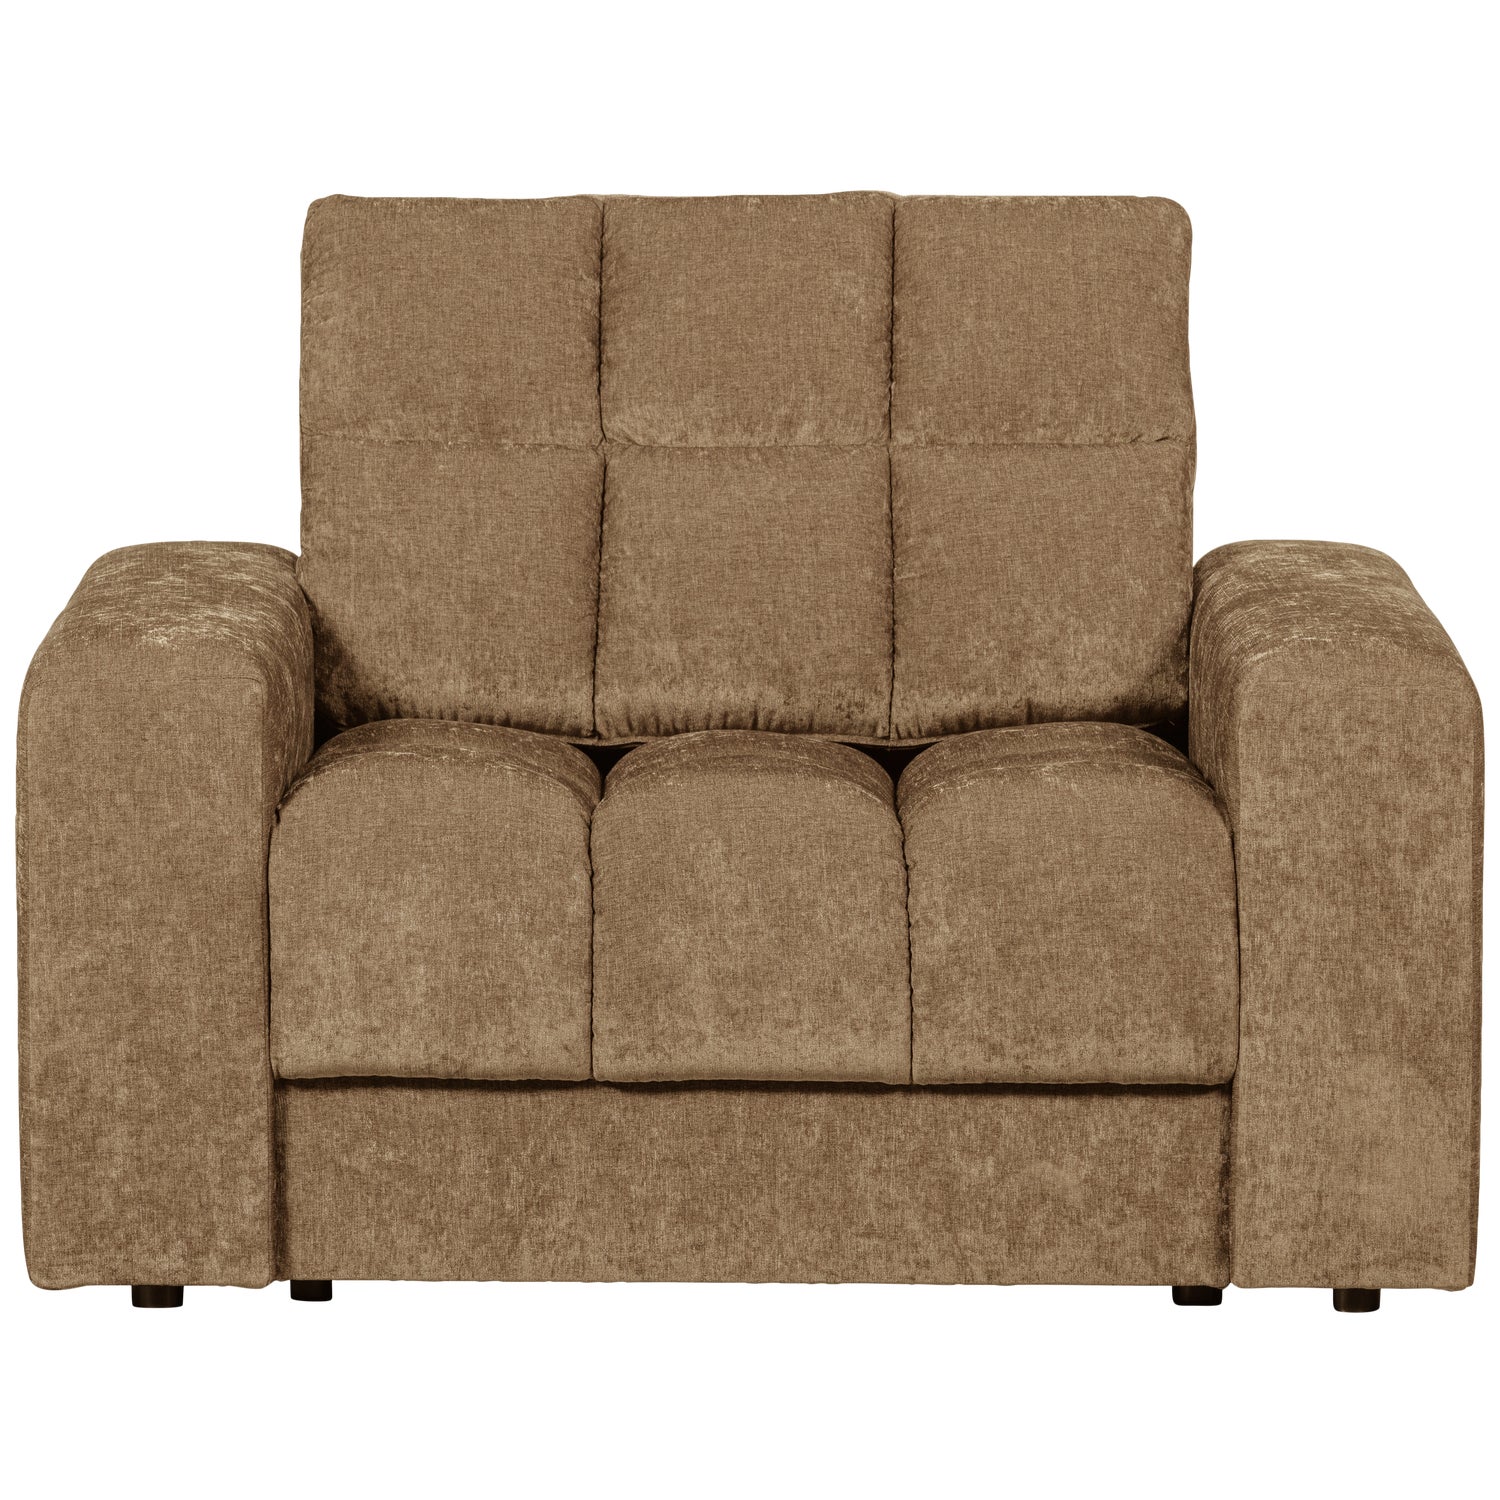 379003-Z-01_VS_WE_Second_date_fauteuil_vintage_zand.png?auto=webp&format=png&width=1500&height=1500